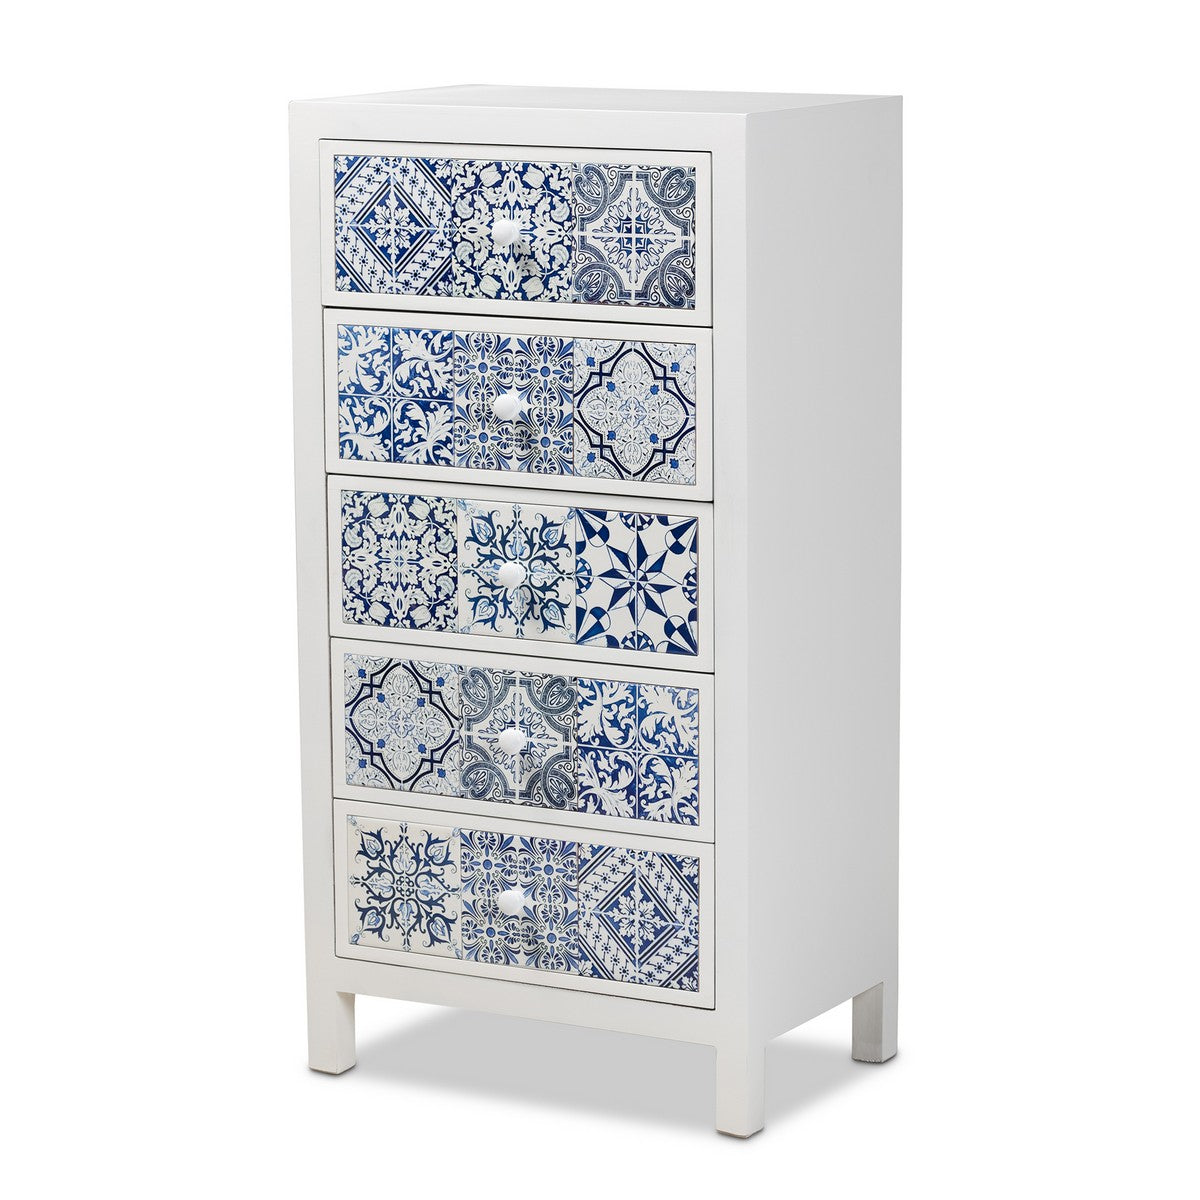 Baxton Studio Alma Spanish Mediterranean Inspired White Wood and Blue Floral Tile Style 5-Drawer Accent Chest Baxton Studio-Chests-Minimal And Modern - 1